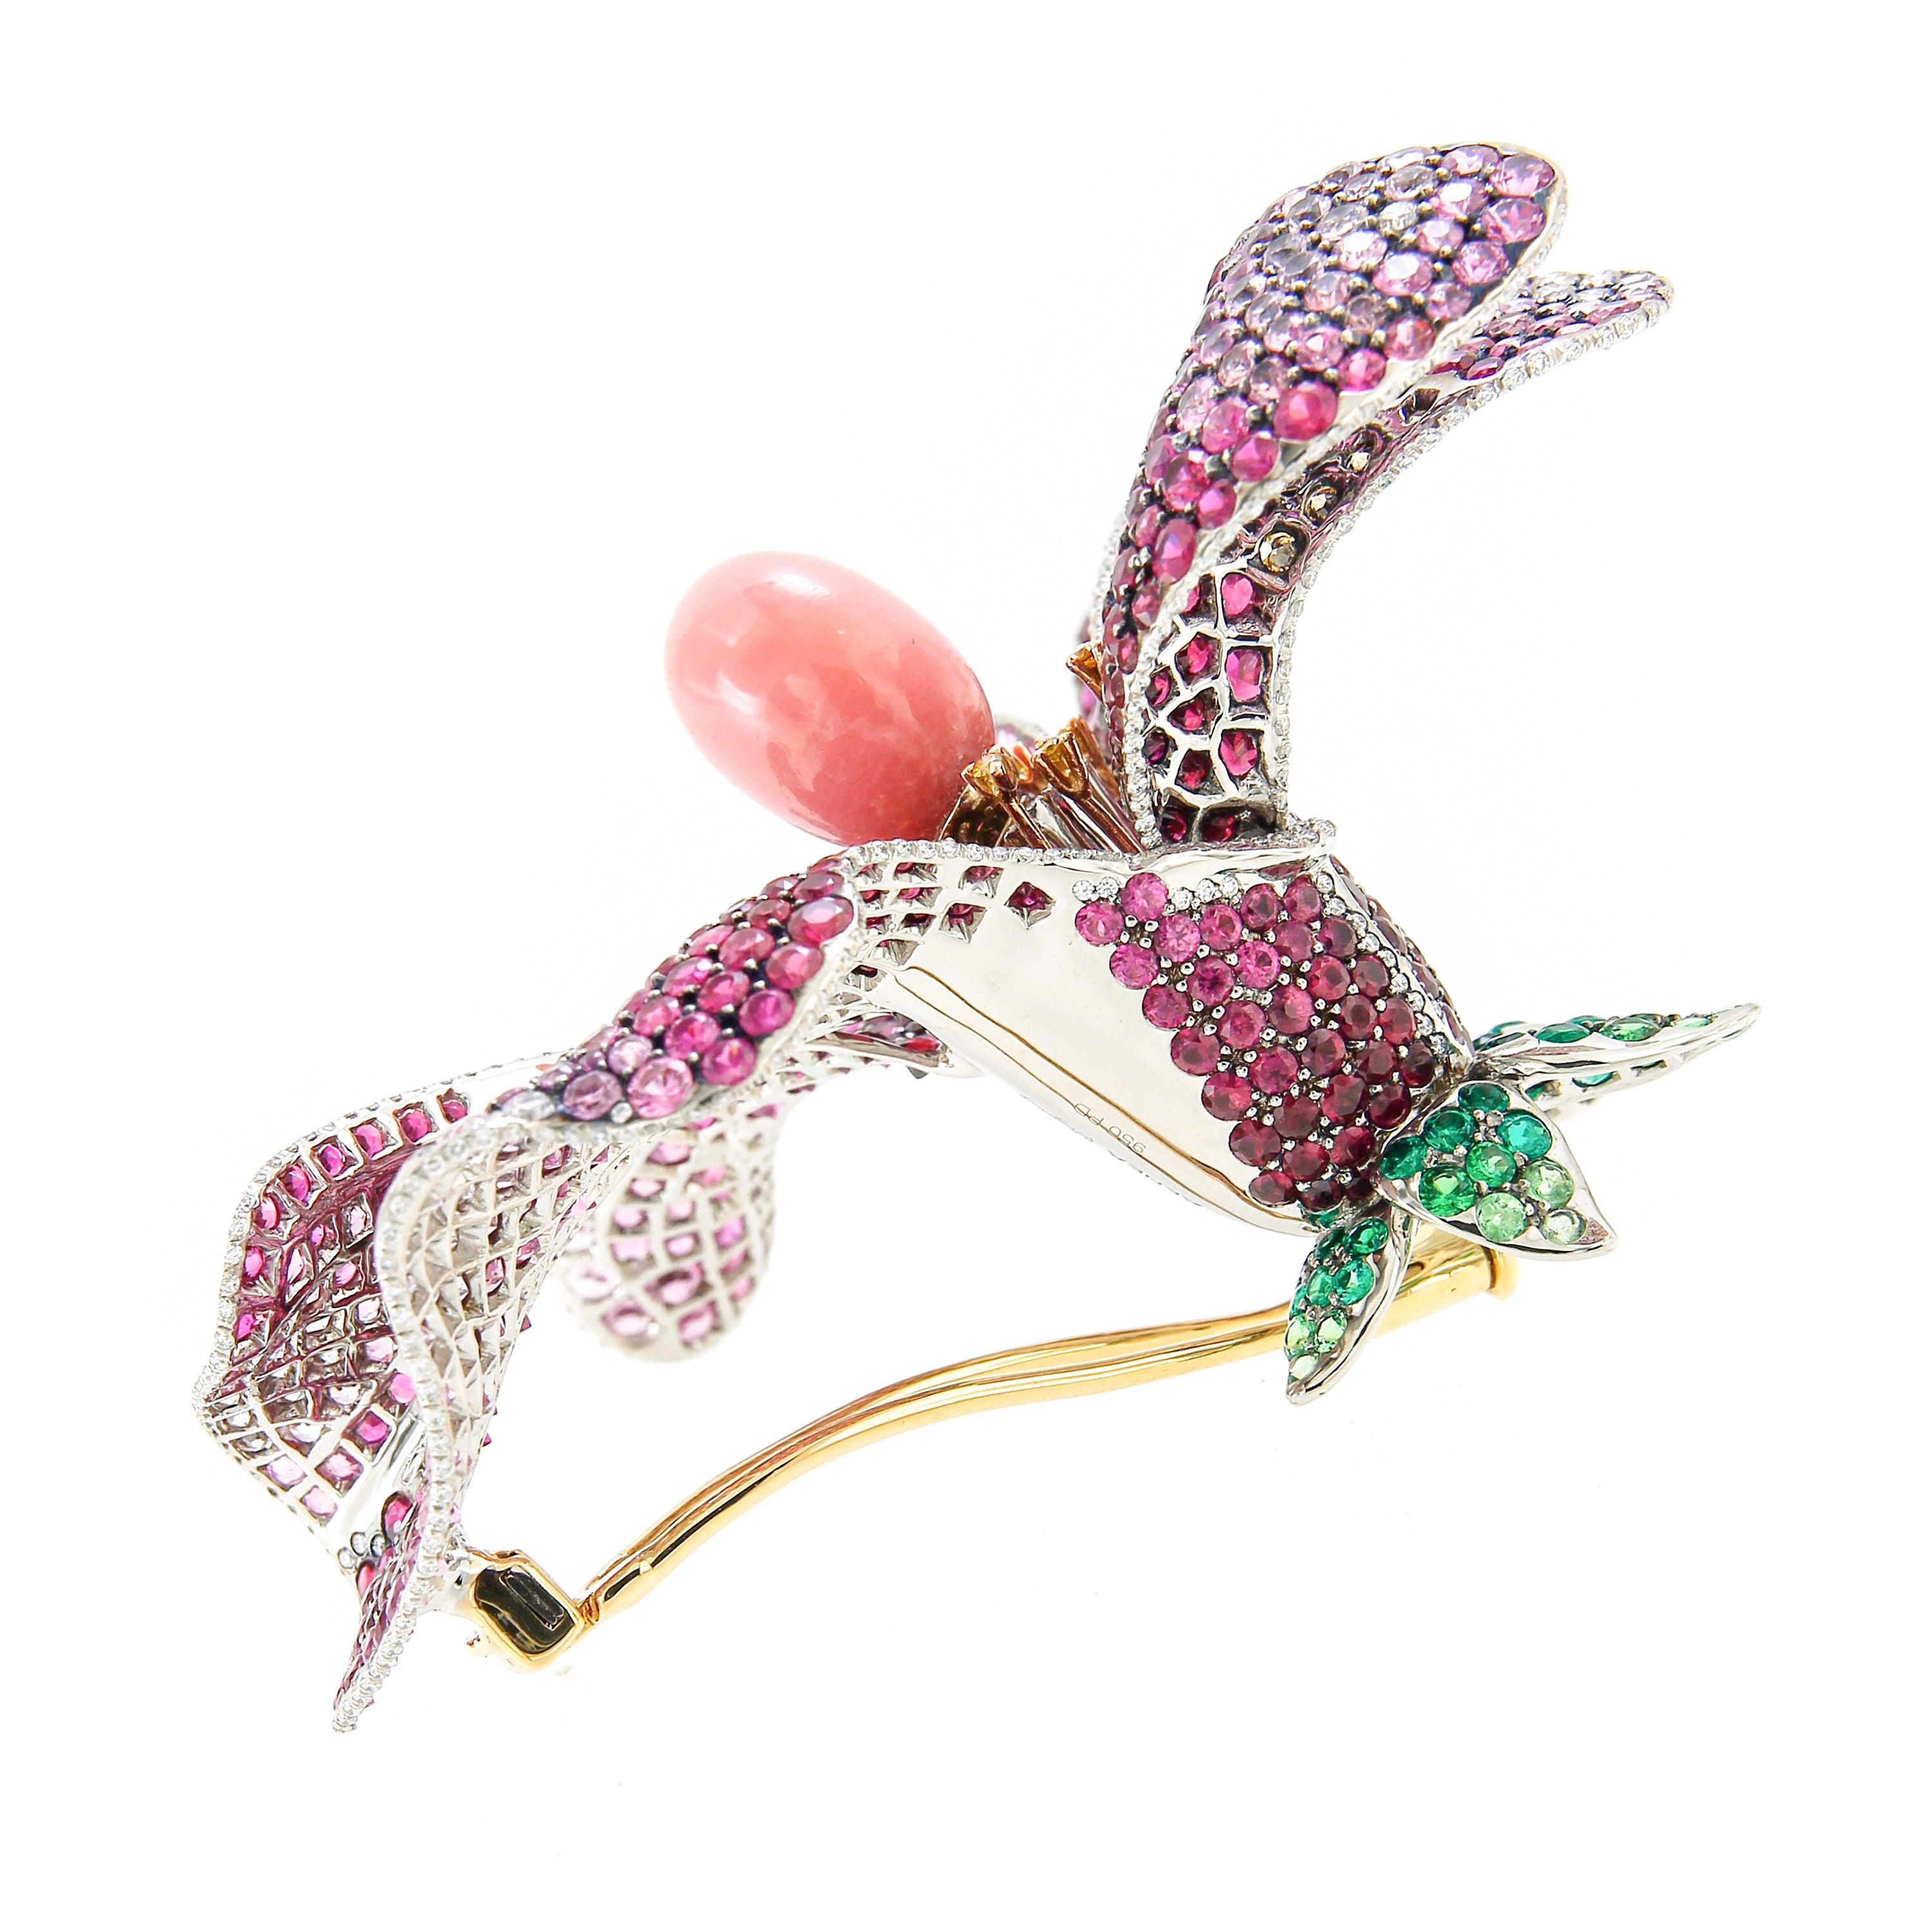 Brooch "Lilly" Yellow Gold and Palladium with Diamonds and Rubies and a Conch Pearl